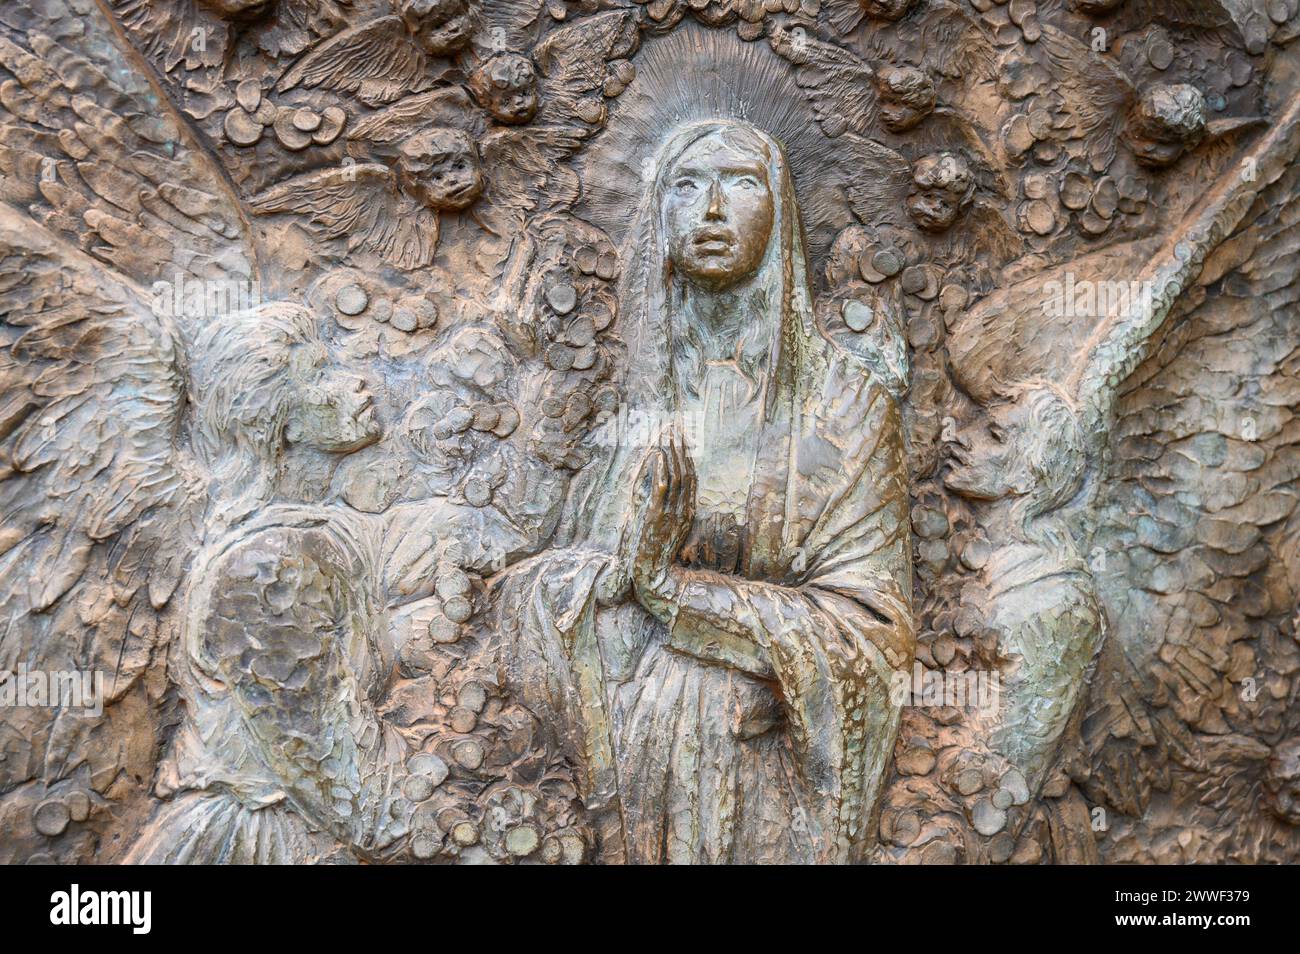 The Assumption of Mary – Fourth Glorious Mystery of the Rosary. A relief sculpture on Mount Podbrdo (the Hill of Apparitions) in Medjugorje. Stock Photo